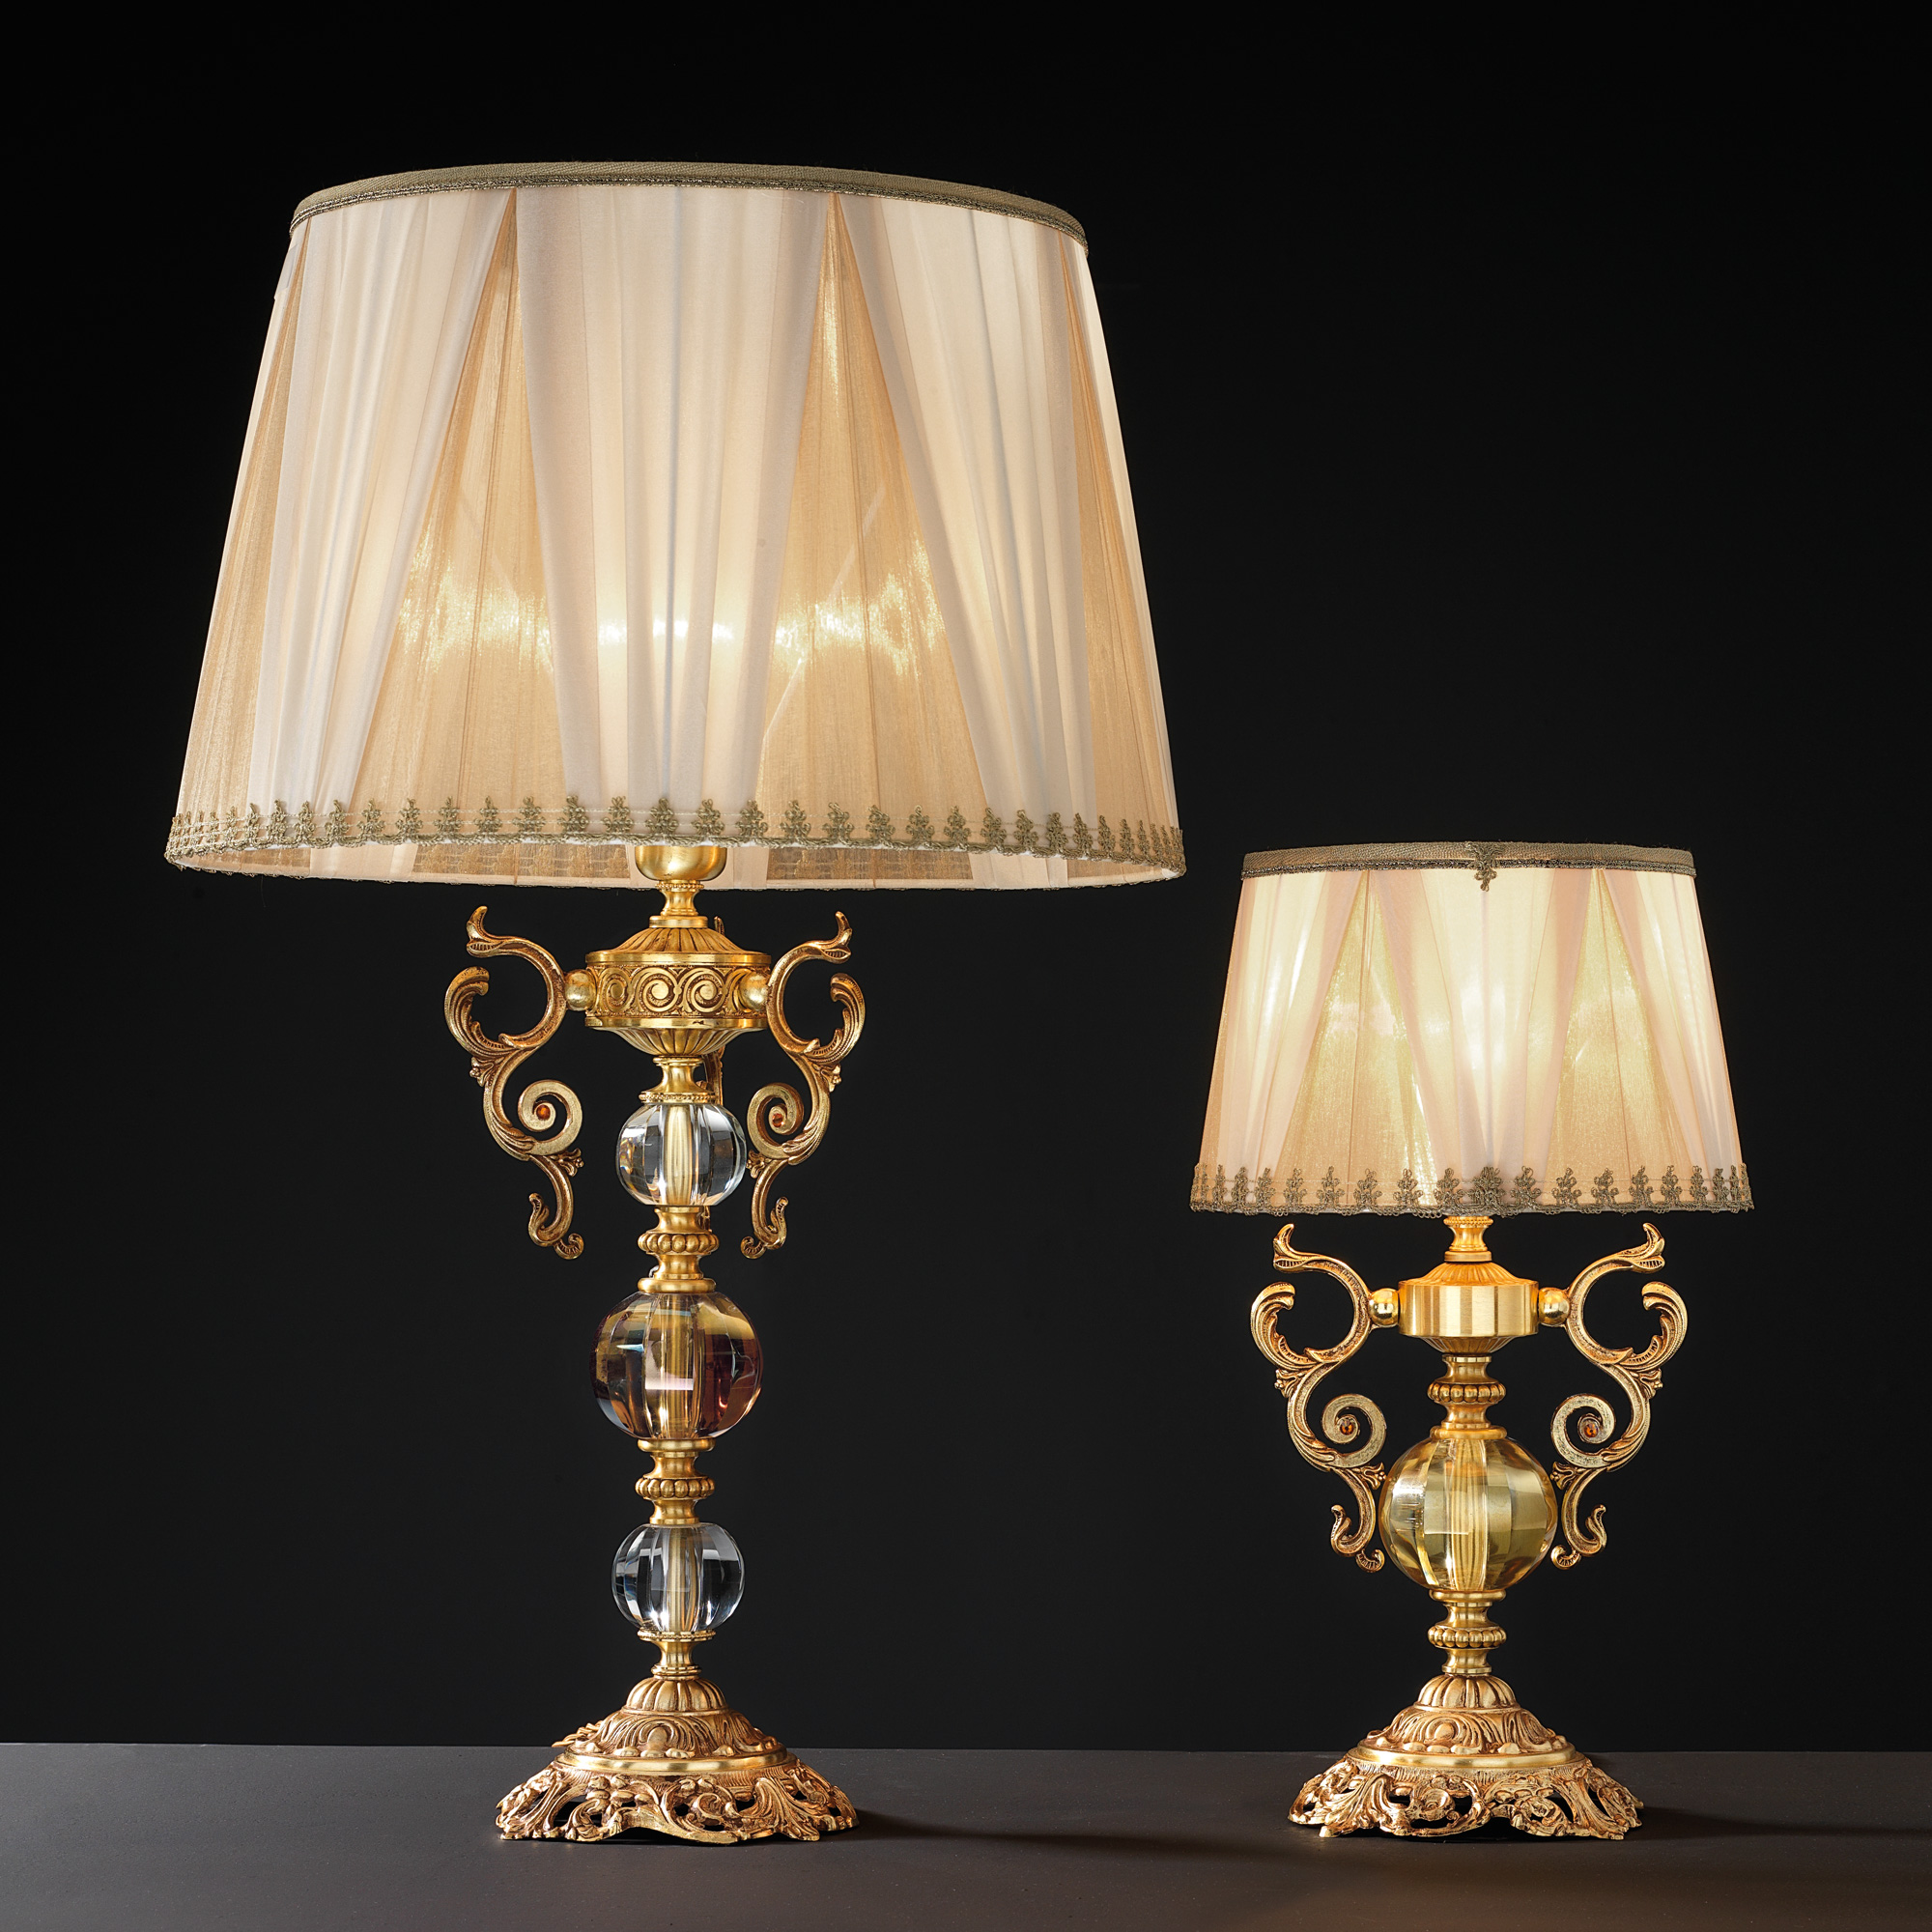 High End Ornate Glass Table Lamp